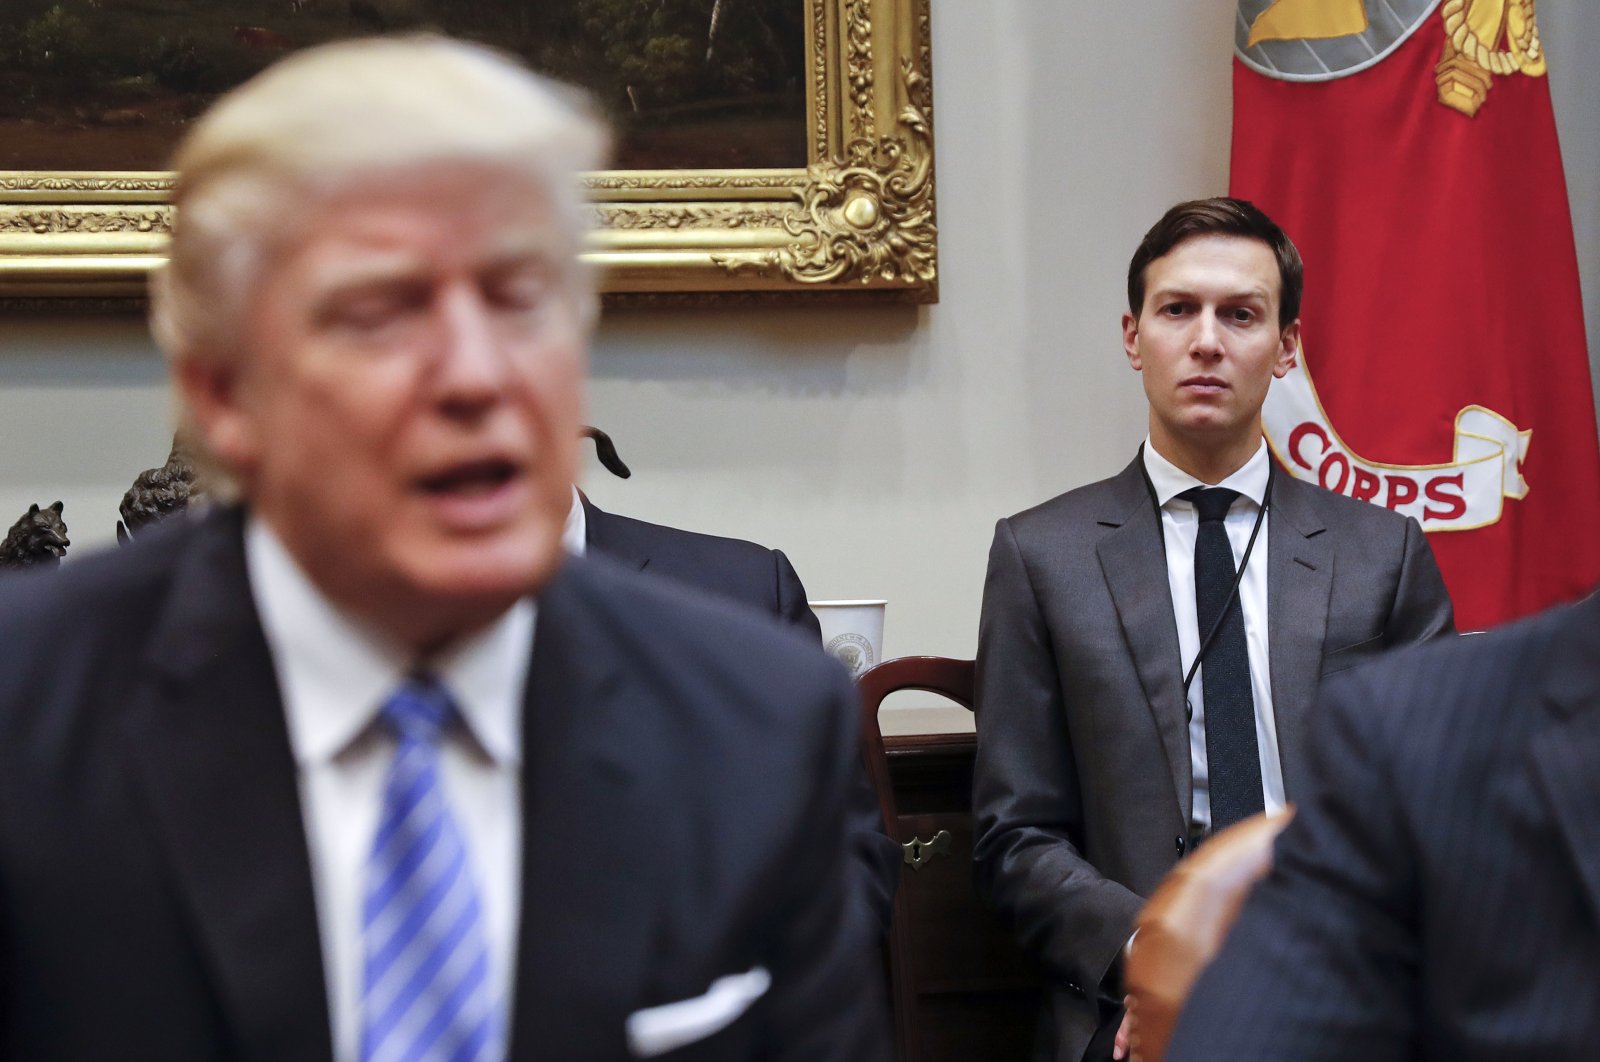 Former White House Senior Adviser Jared Kushner (R) listens at right as then-President Donald Trump speaks during a breakfast with business leaders in the Roosevelt Room of the White House in Washington, U.S., Jan. 23, 2017. (AP File Photo))